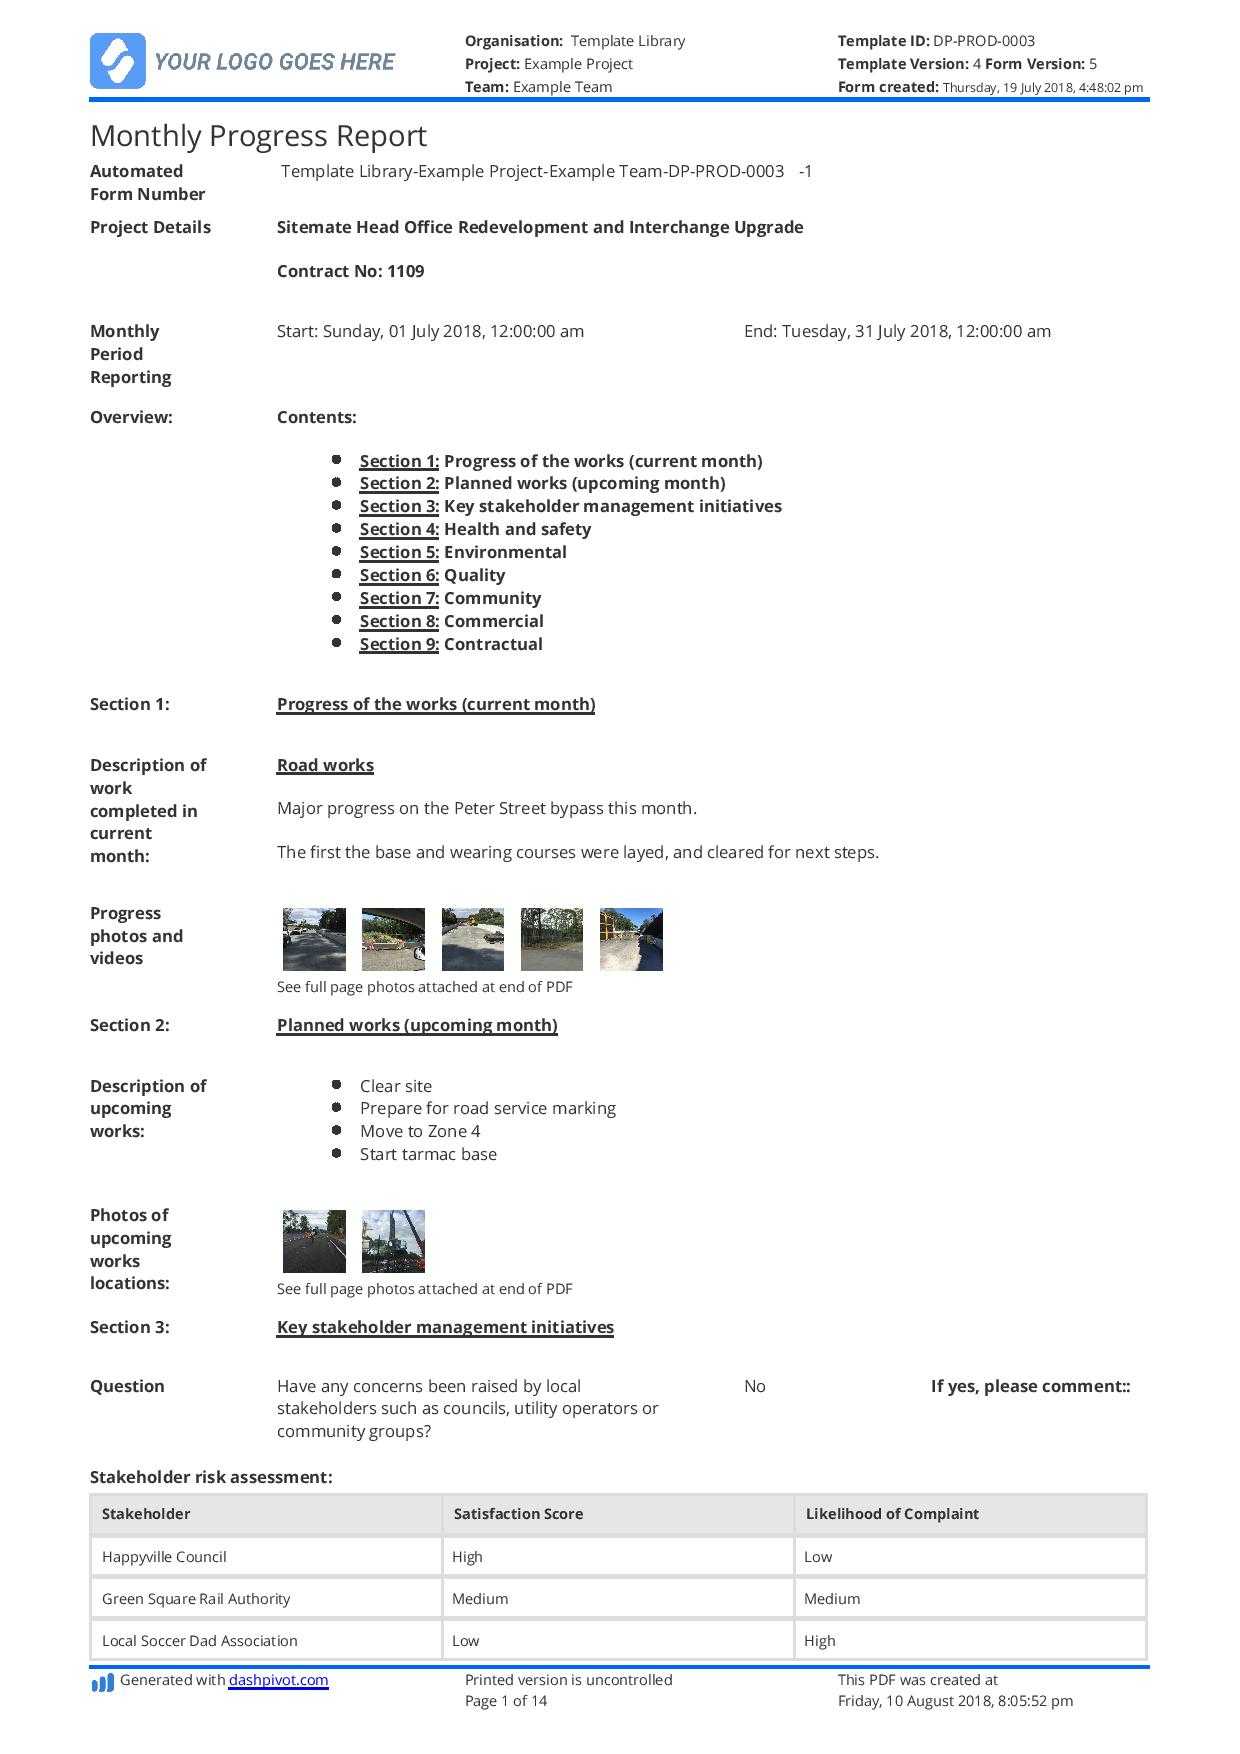 Monthly Construction Progress Report Template: Use This Pertaining To Monthly Project Progress Report Template